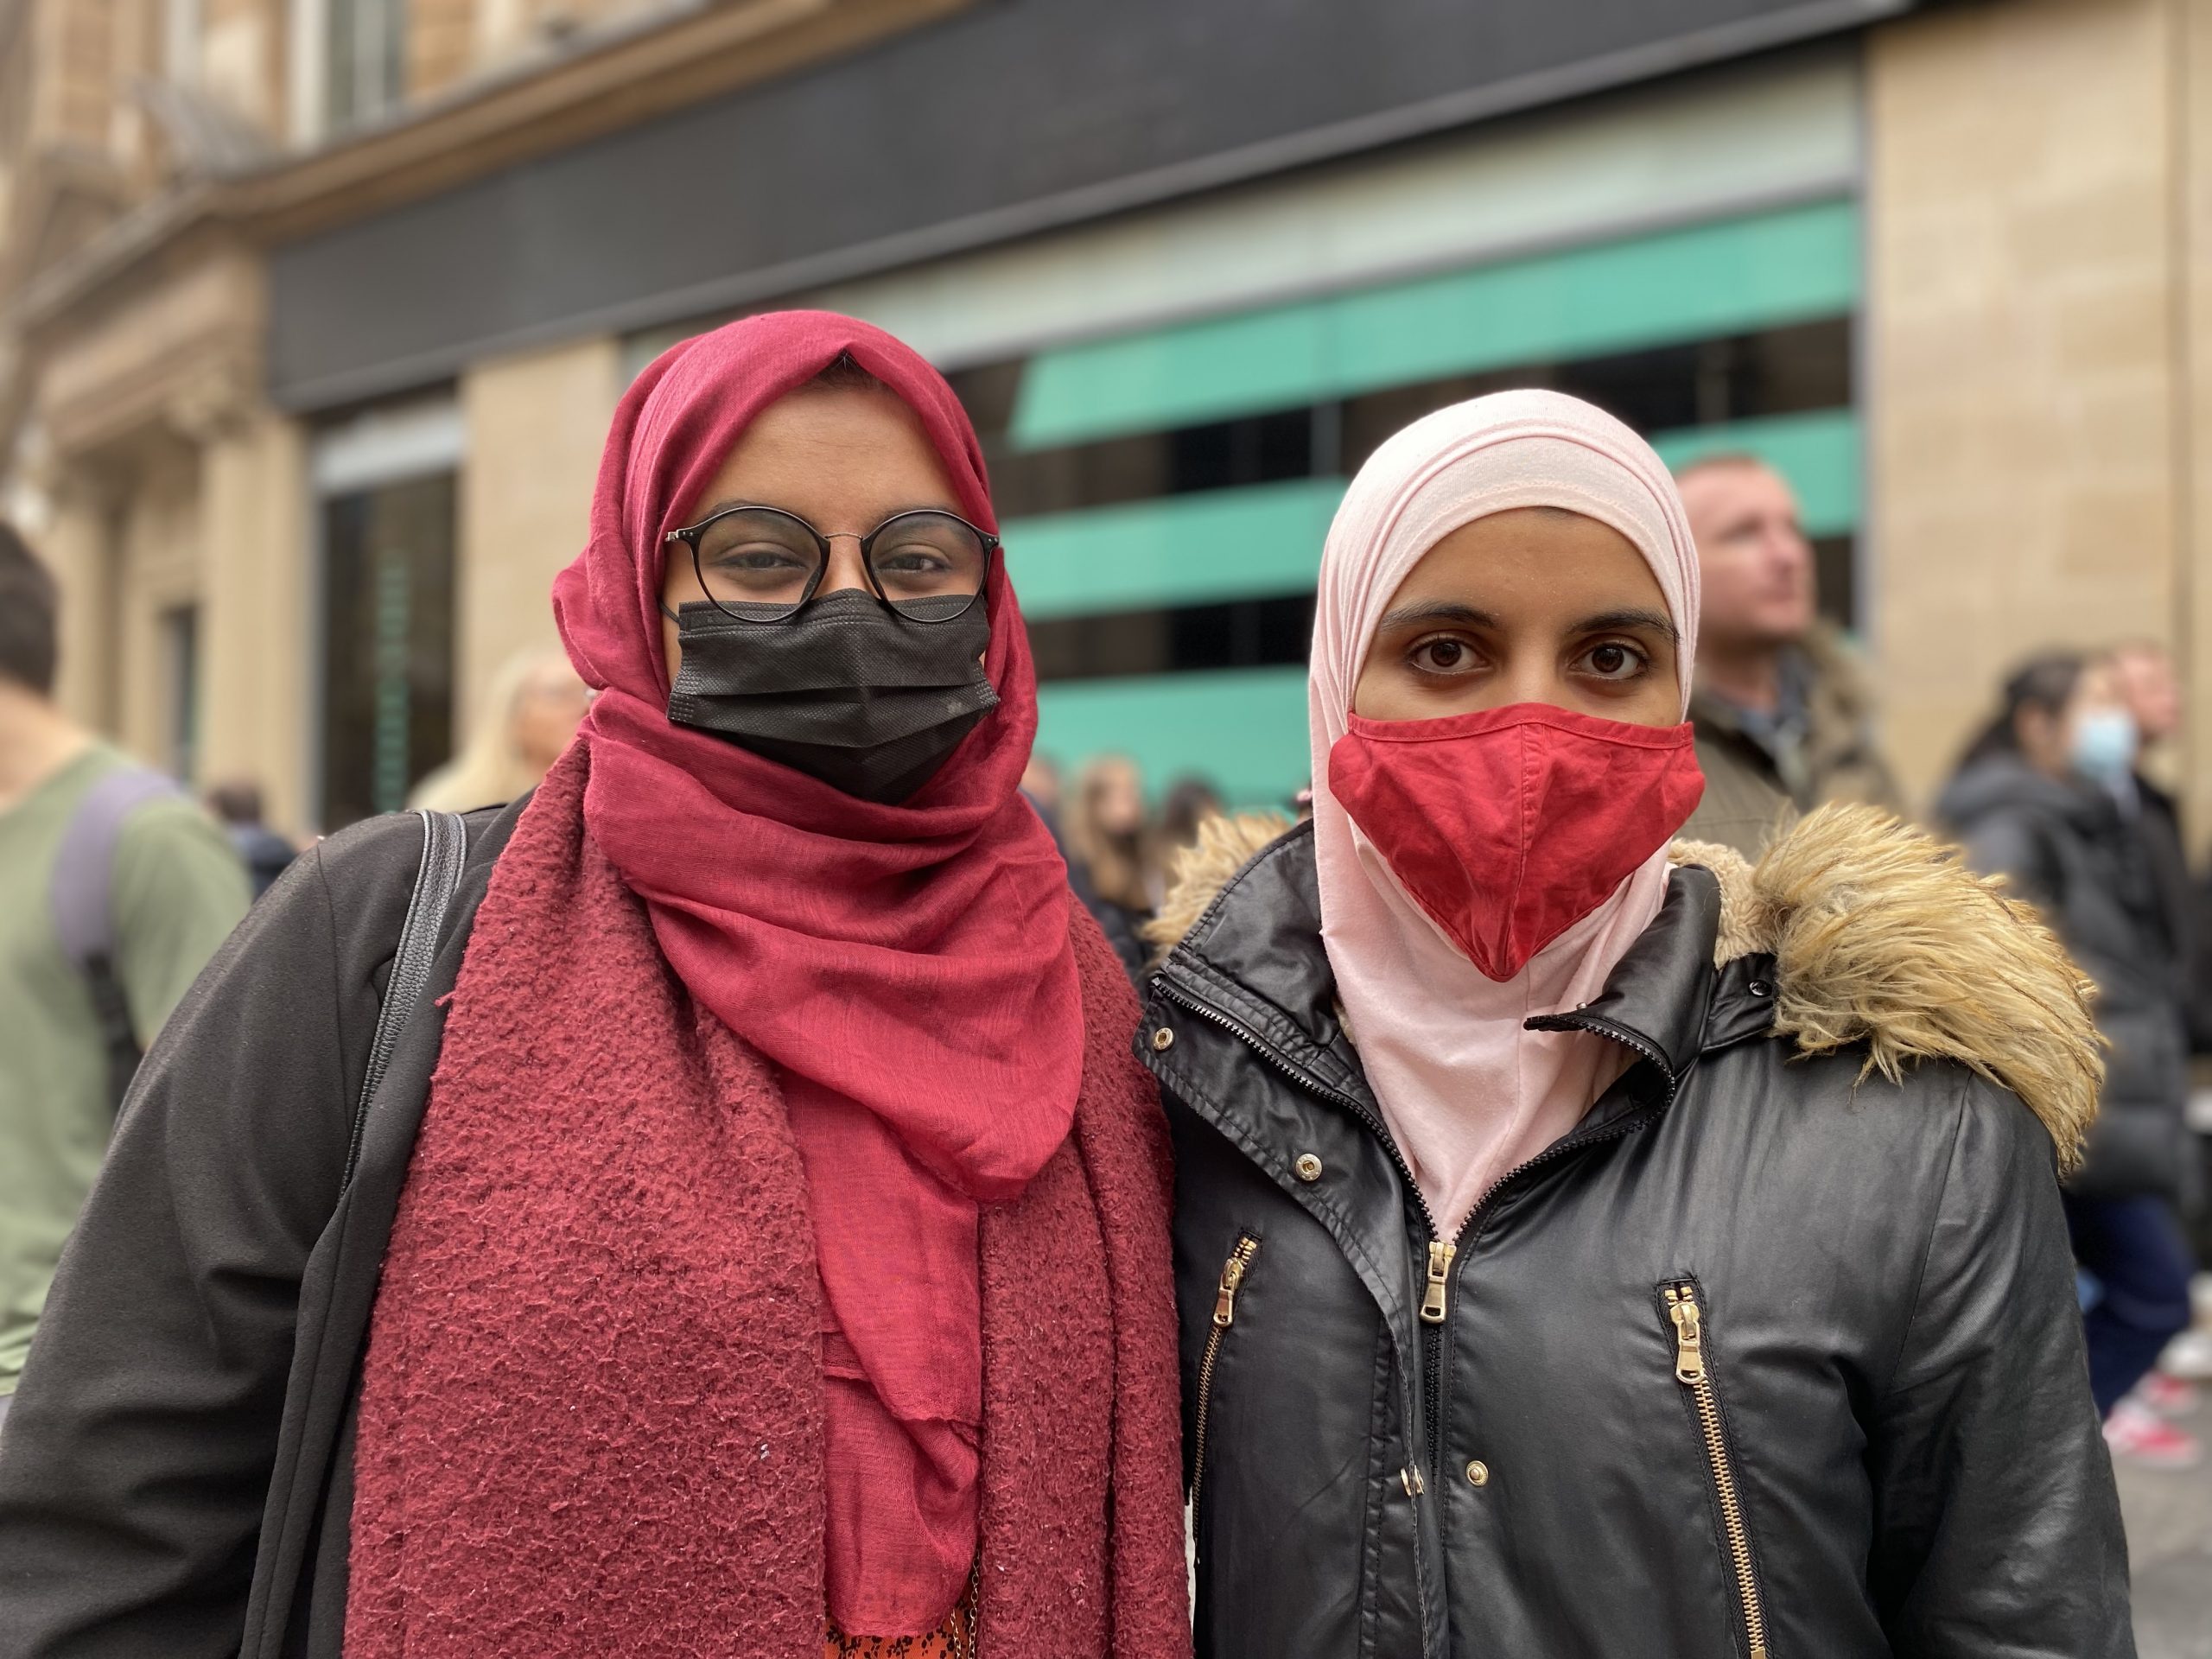 Sisters Yasmin and Tasnim walk through the streets of Glasgow together at the Extinction Rebellion demo wearing jackets, headscarves and facemasks